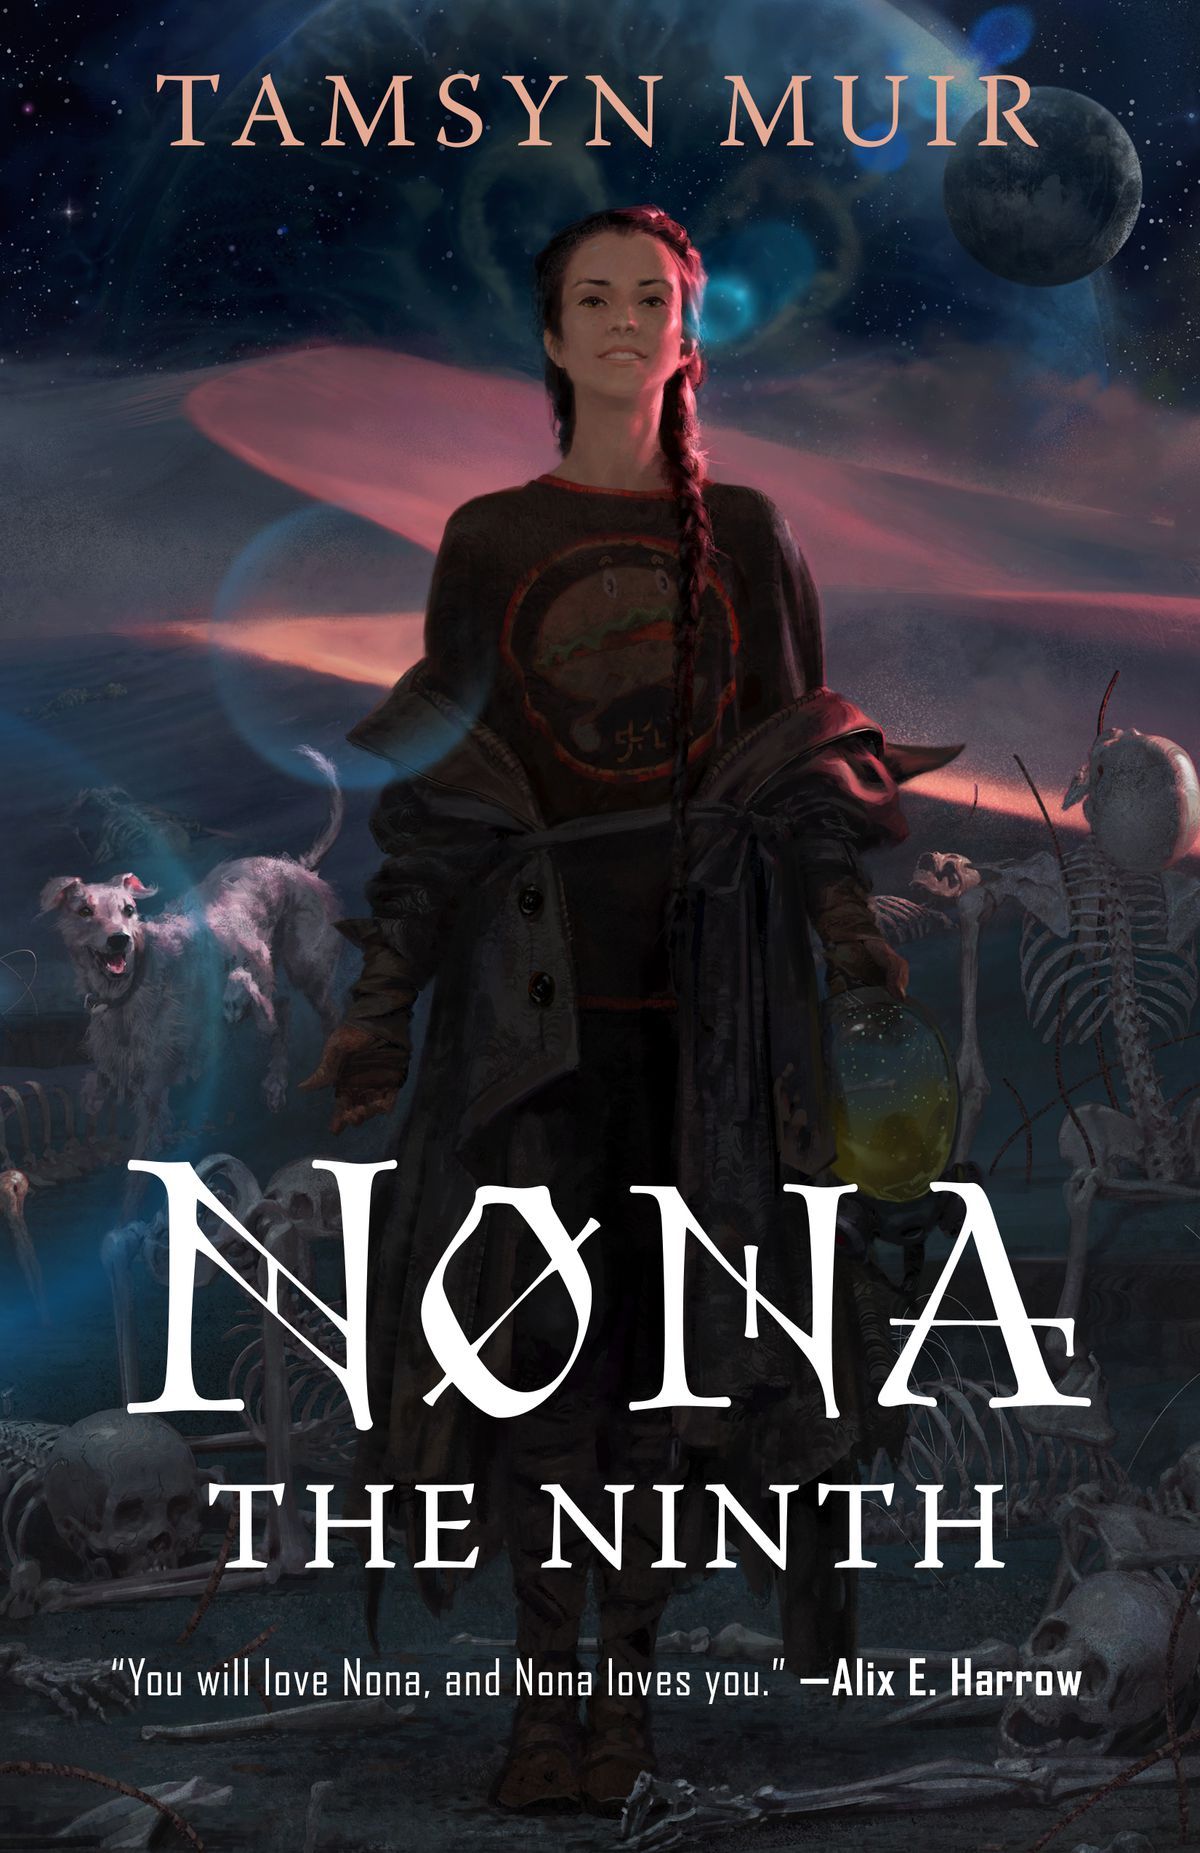 the Nona the Ninth cover, showing a woman with a braid smiling with skeletons behind her